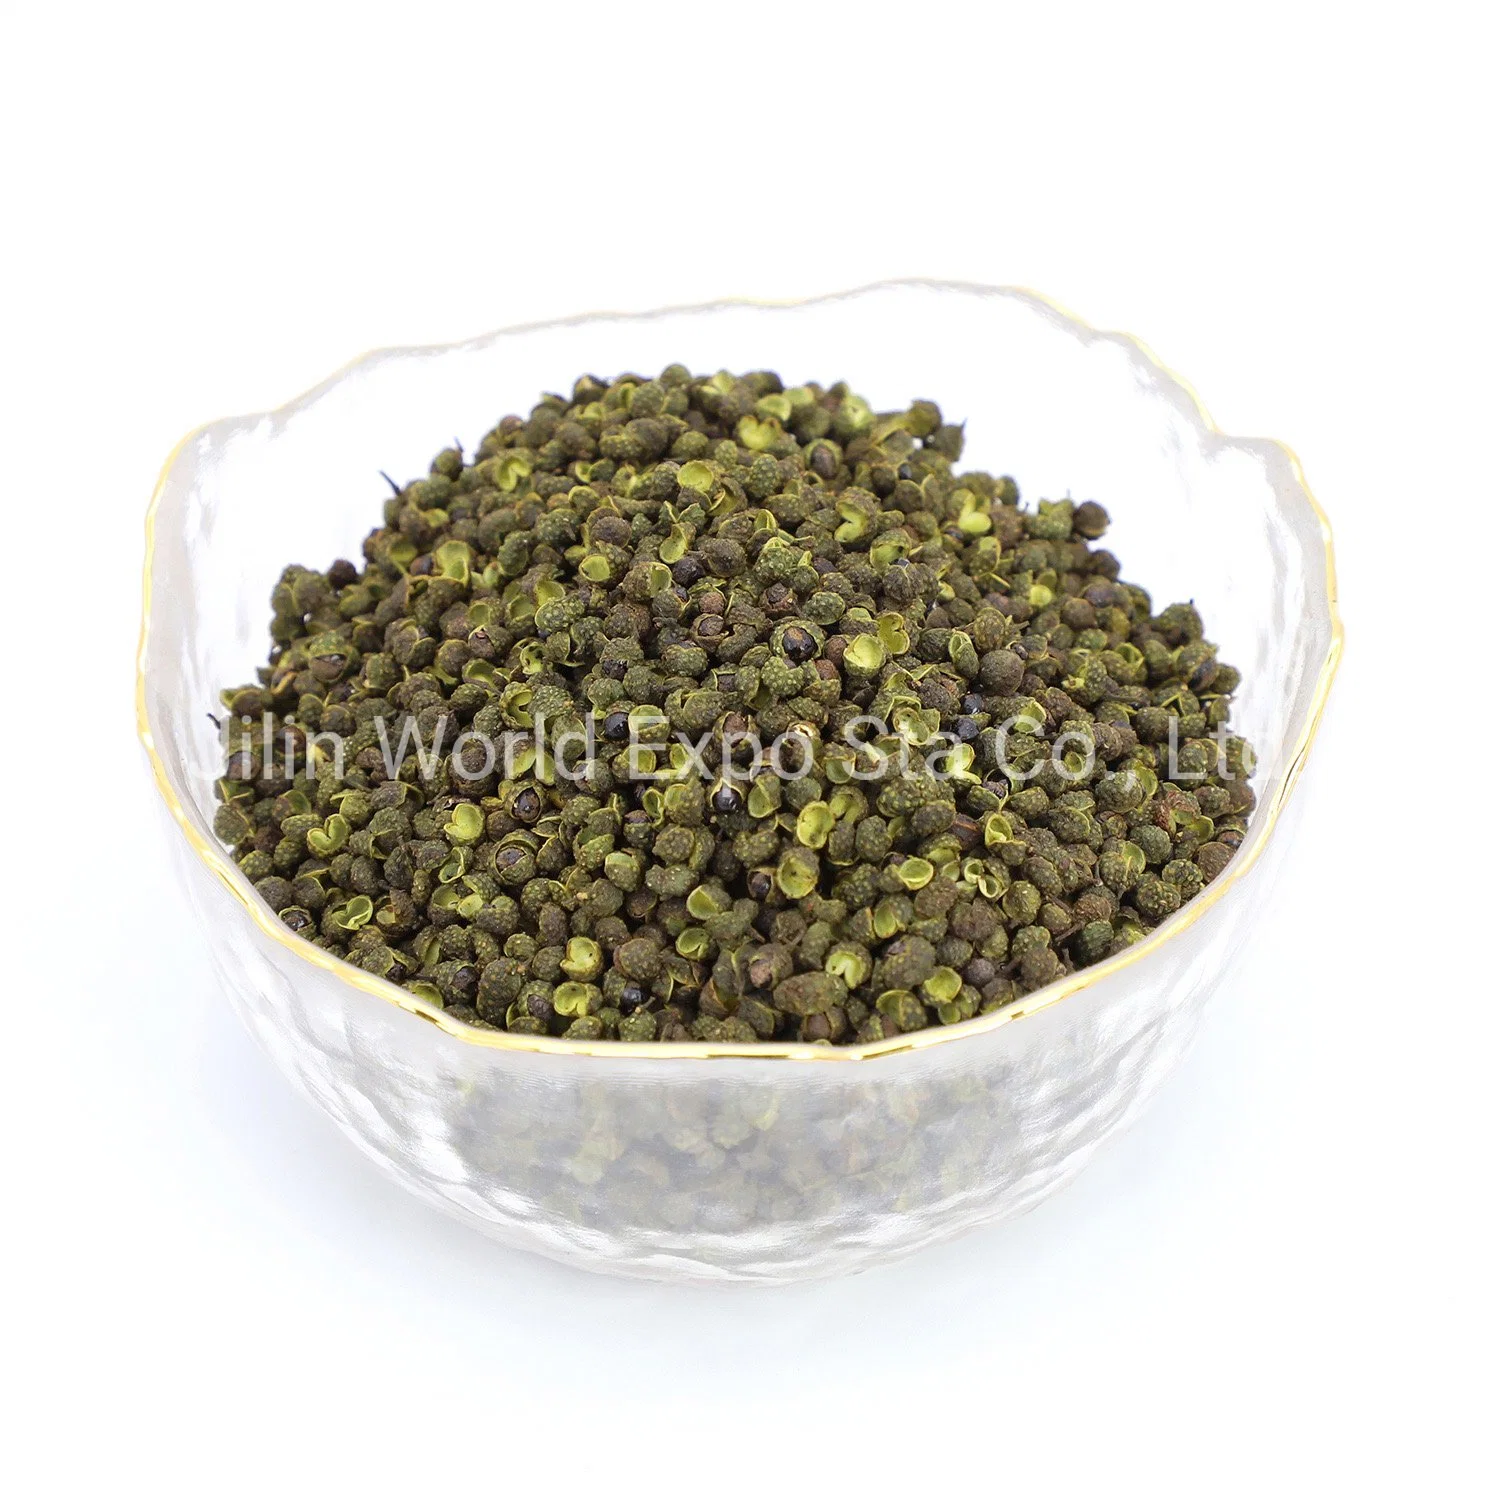 Wholesale/Supplier Dried Green Pepper for Food China